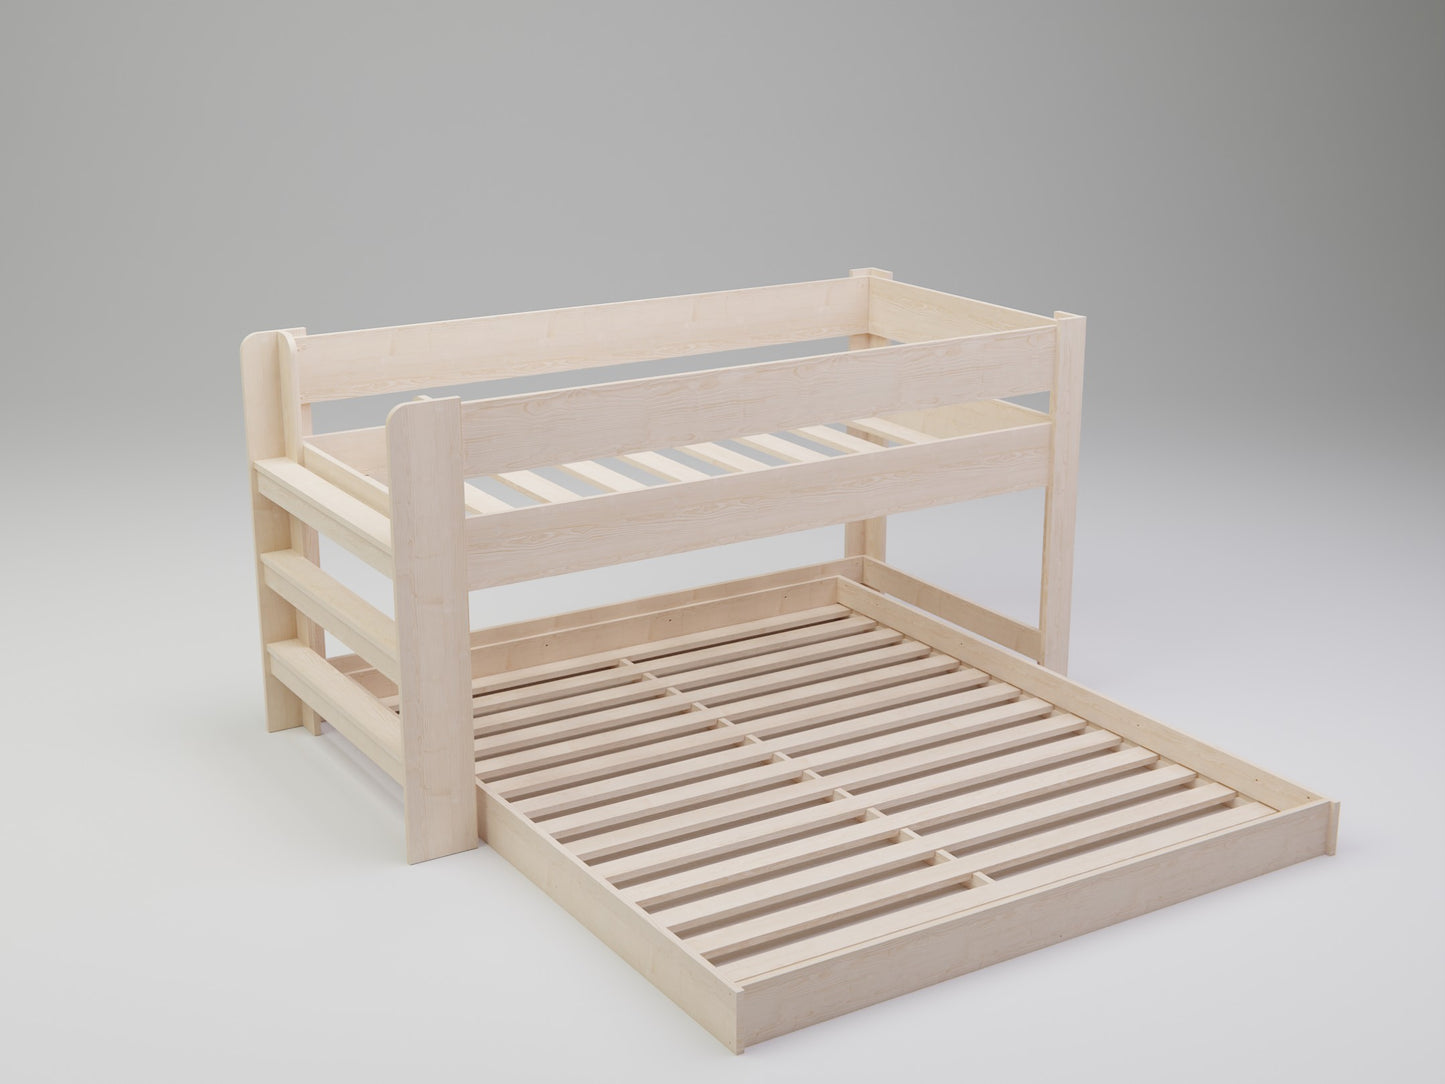 Create cherished shared memories with our L shaped bed, a design perfect for siblings.